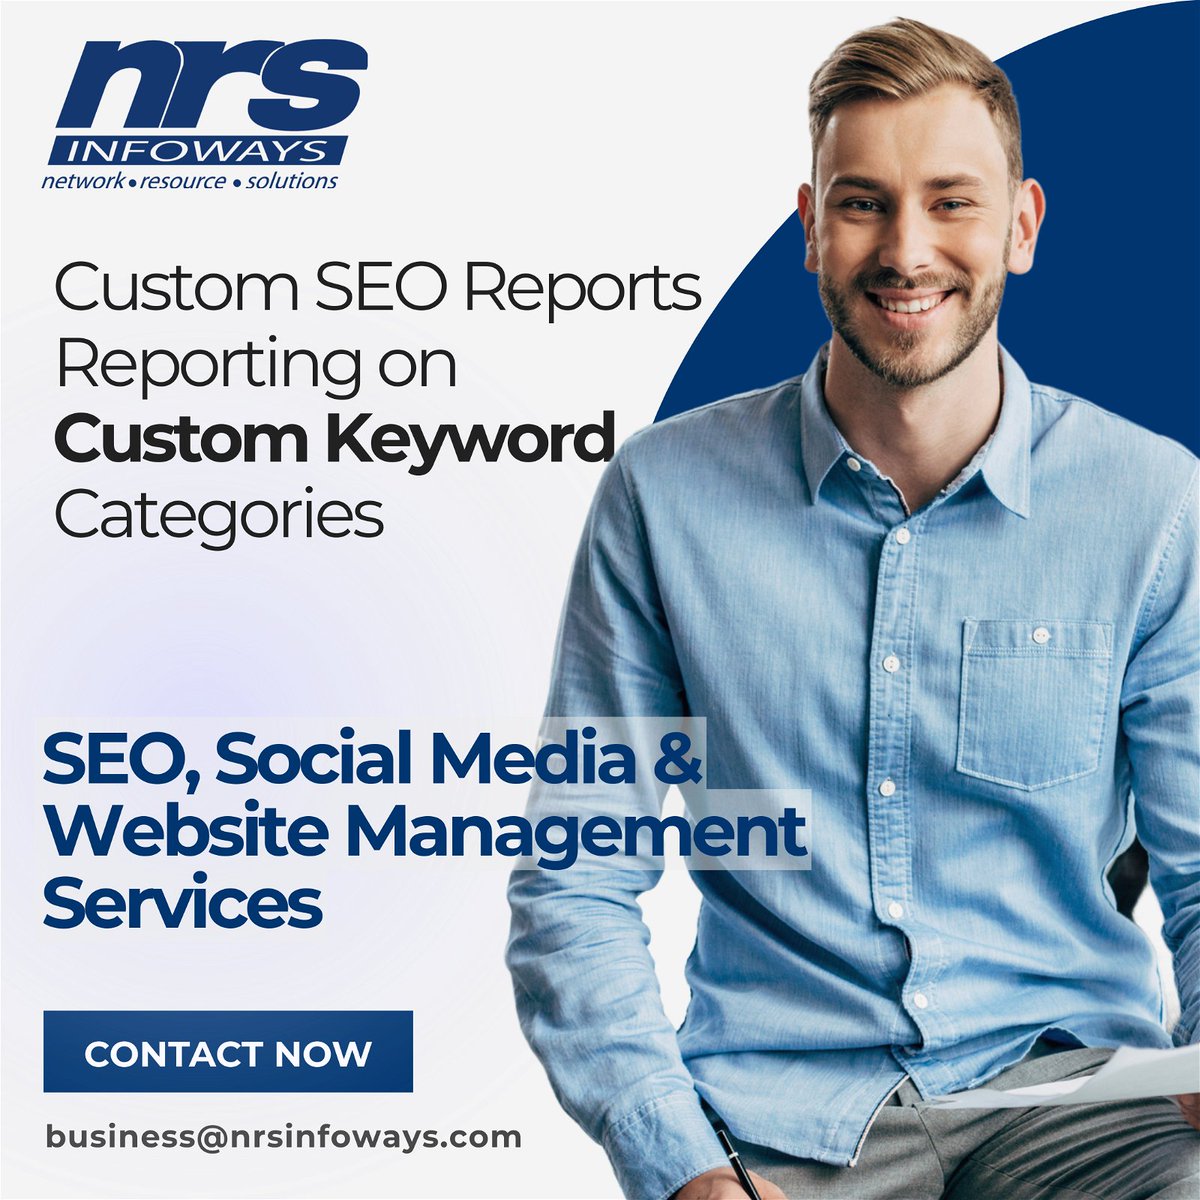 Enterprise SEO Reporting
Transforming the way you track performance with our Custom SEO Reporting at a 'topic' level rather than individual keywords! 📈 

We can help
Lets discuss business@nrsinfoways.com
#localseo #businessinformation #onlinelistings #nrsinfoways #seo